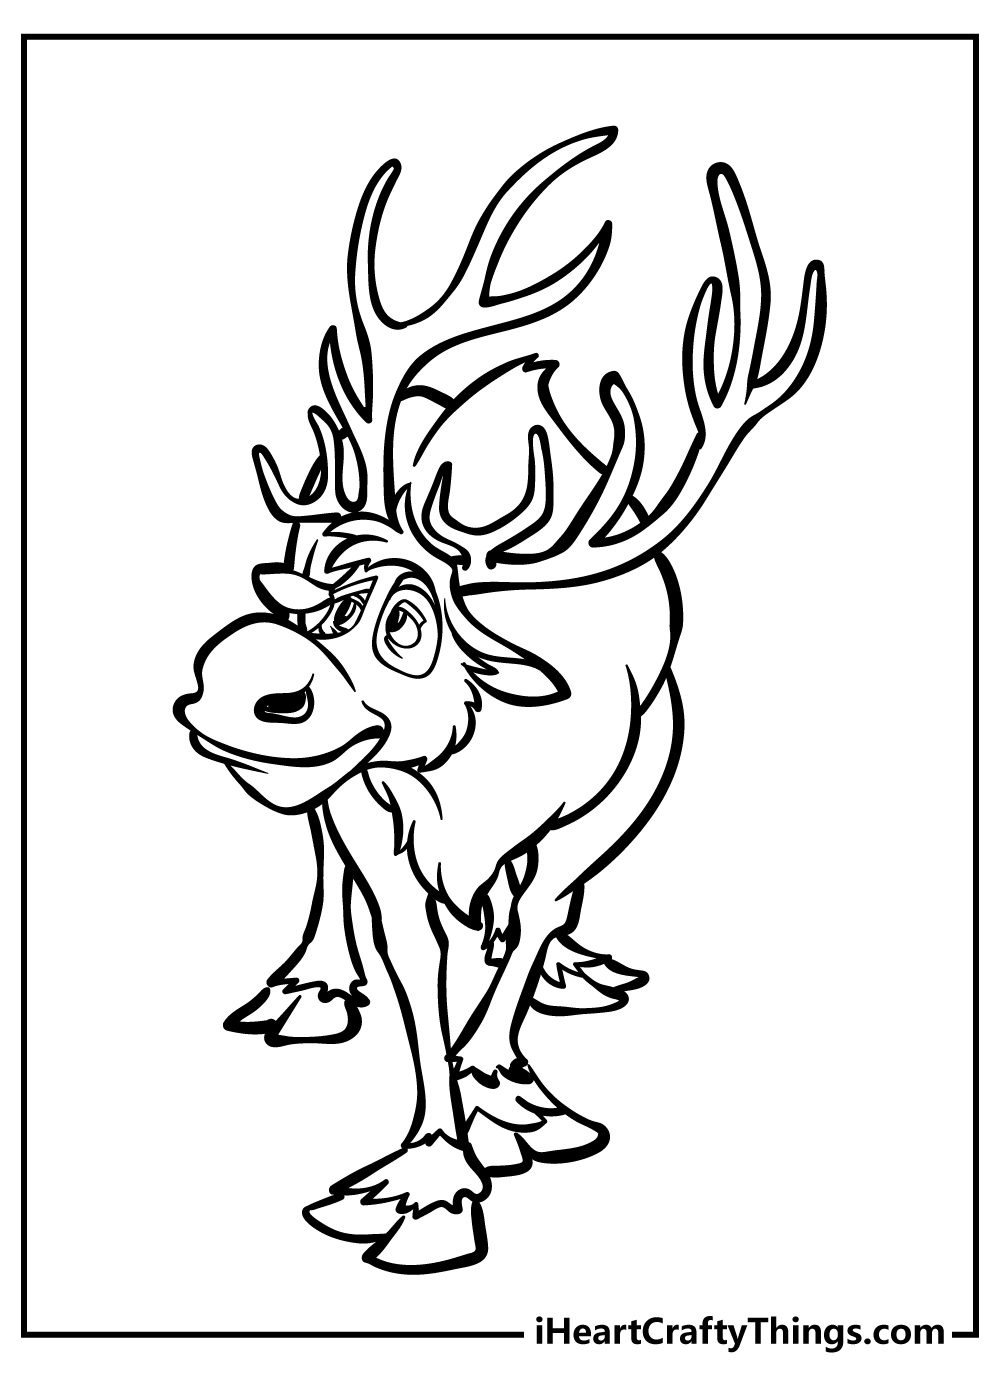 Frozen Coloring Pages for preschoolers free printable